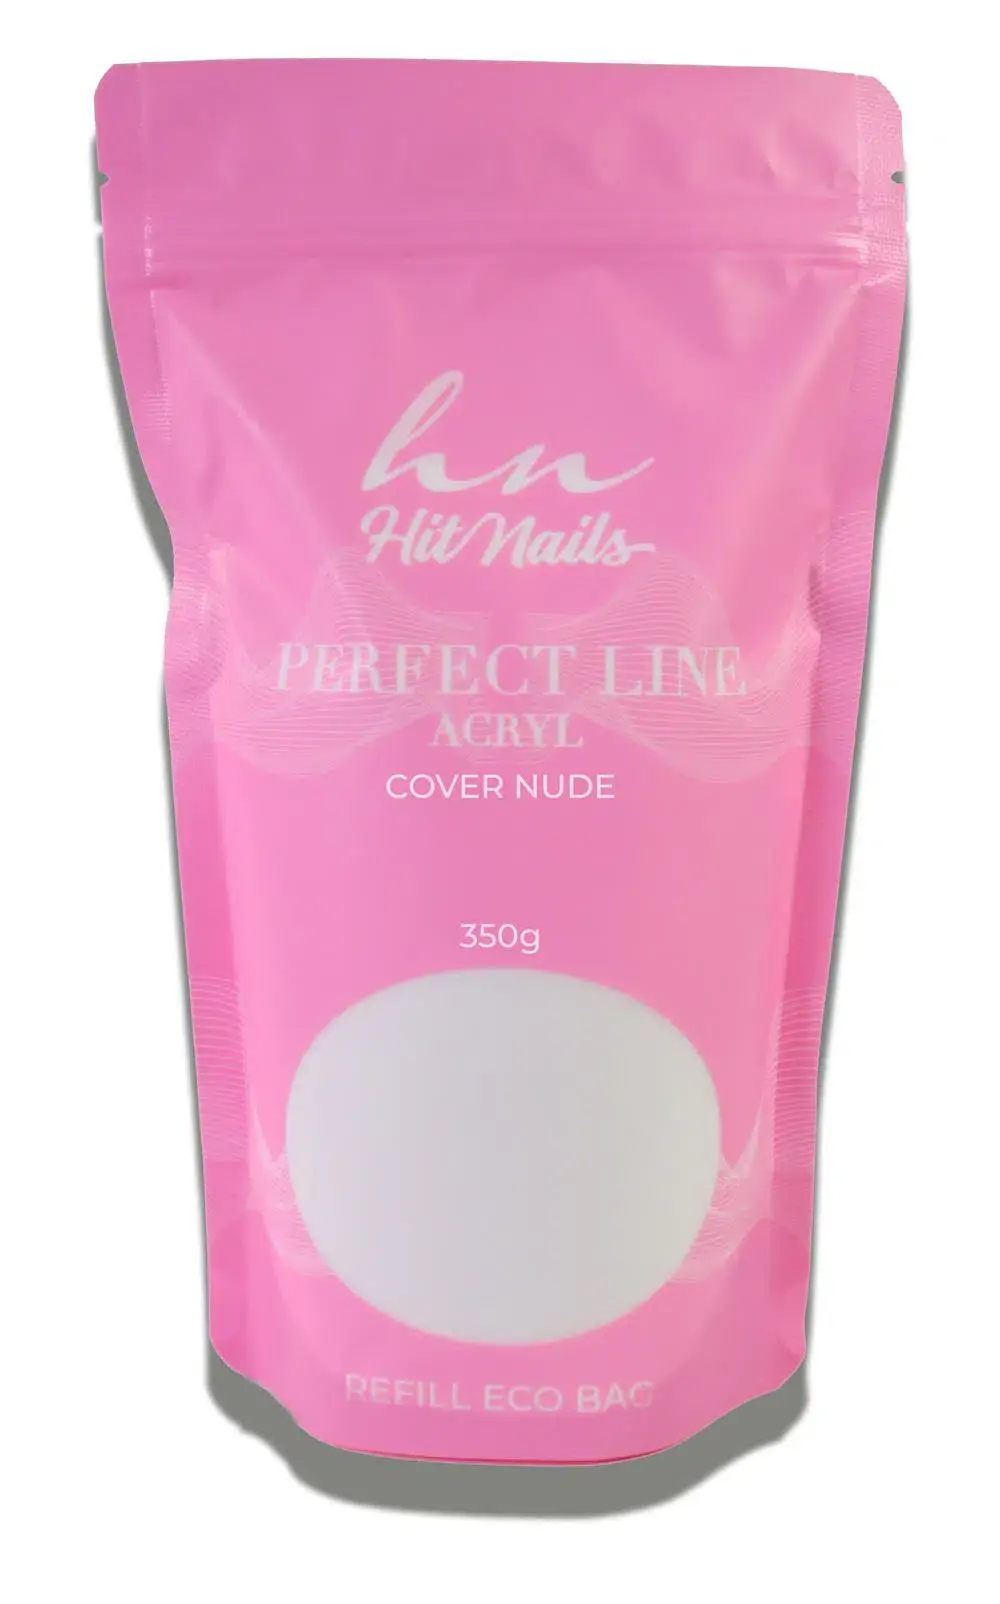 Perfect Line - Acryl - Cover Nude 350g Refill